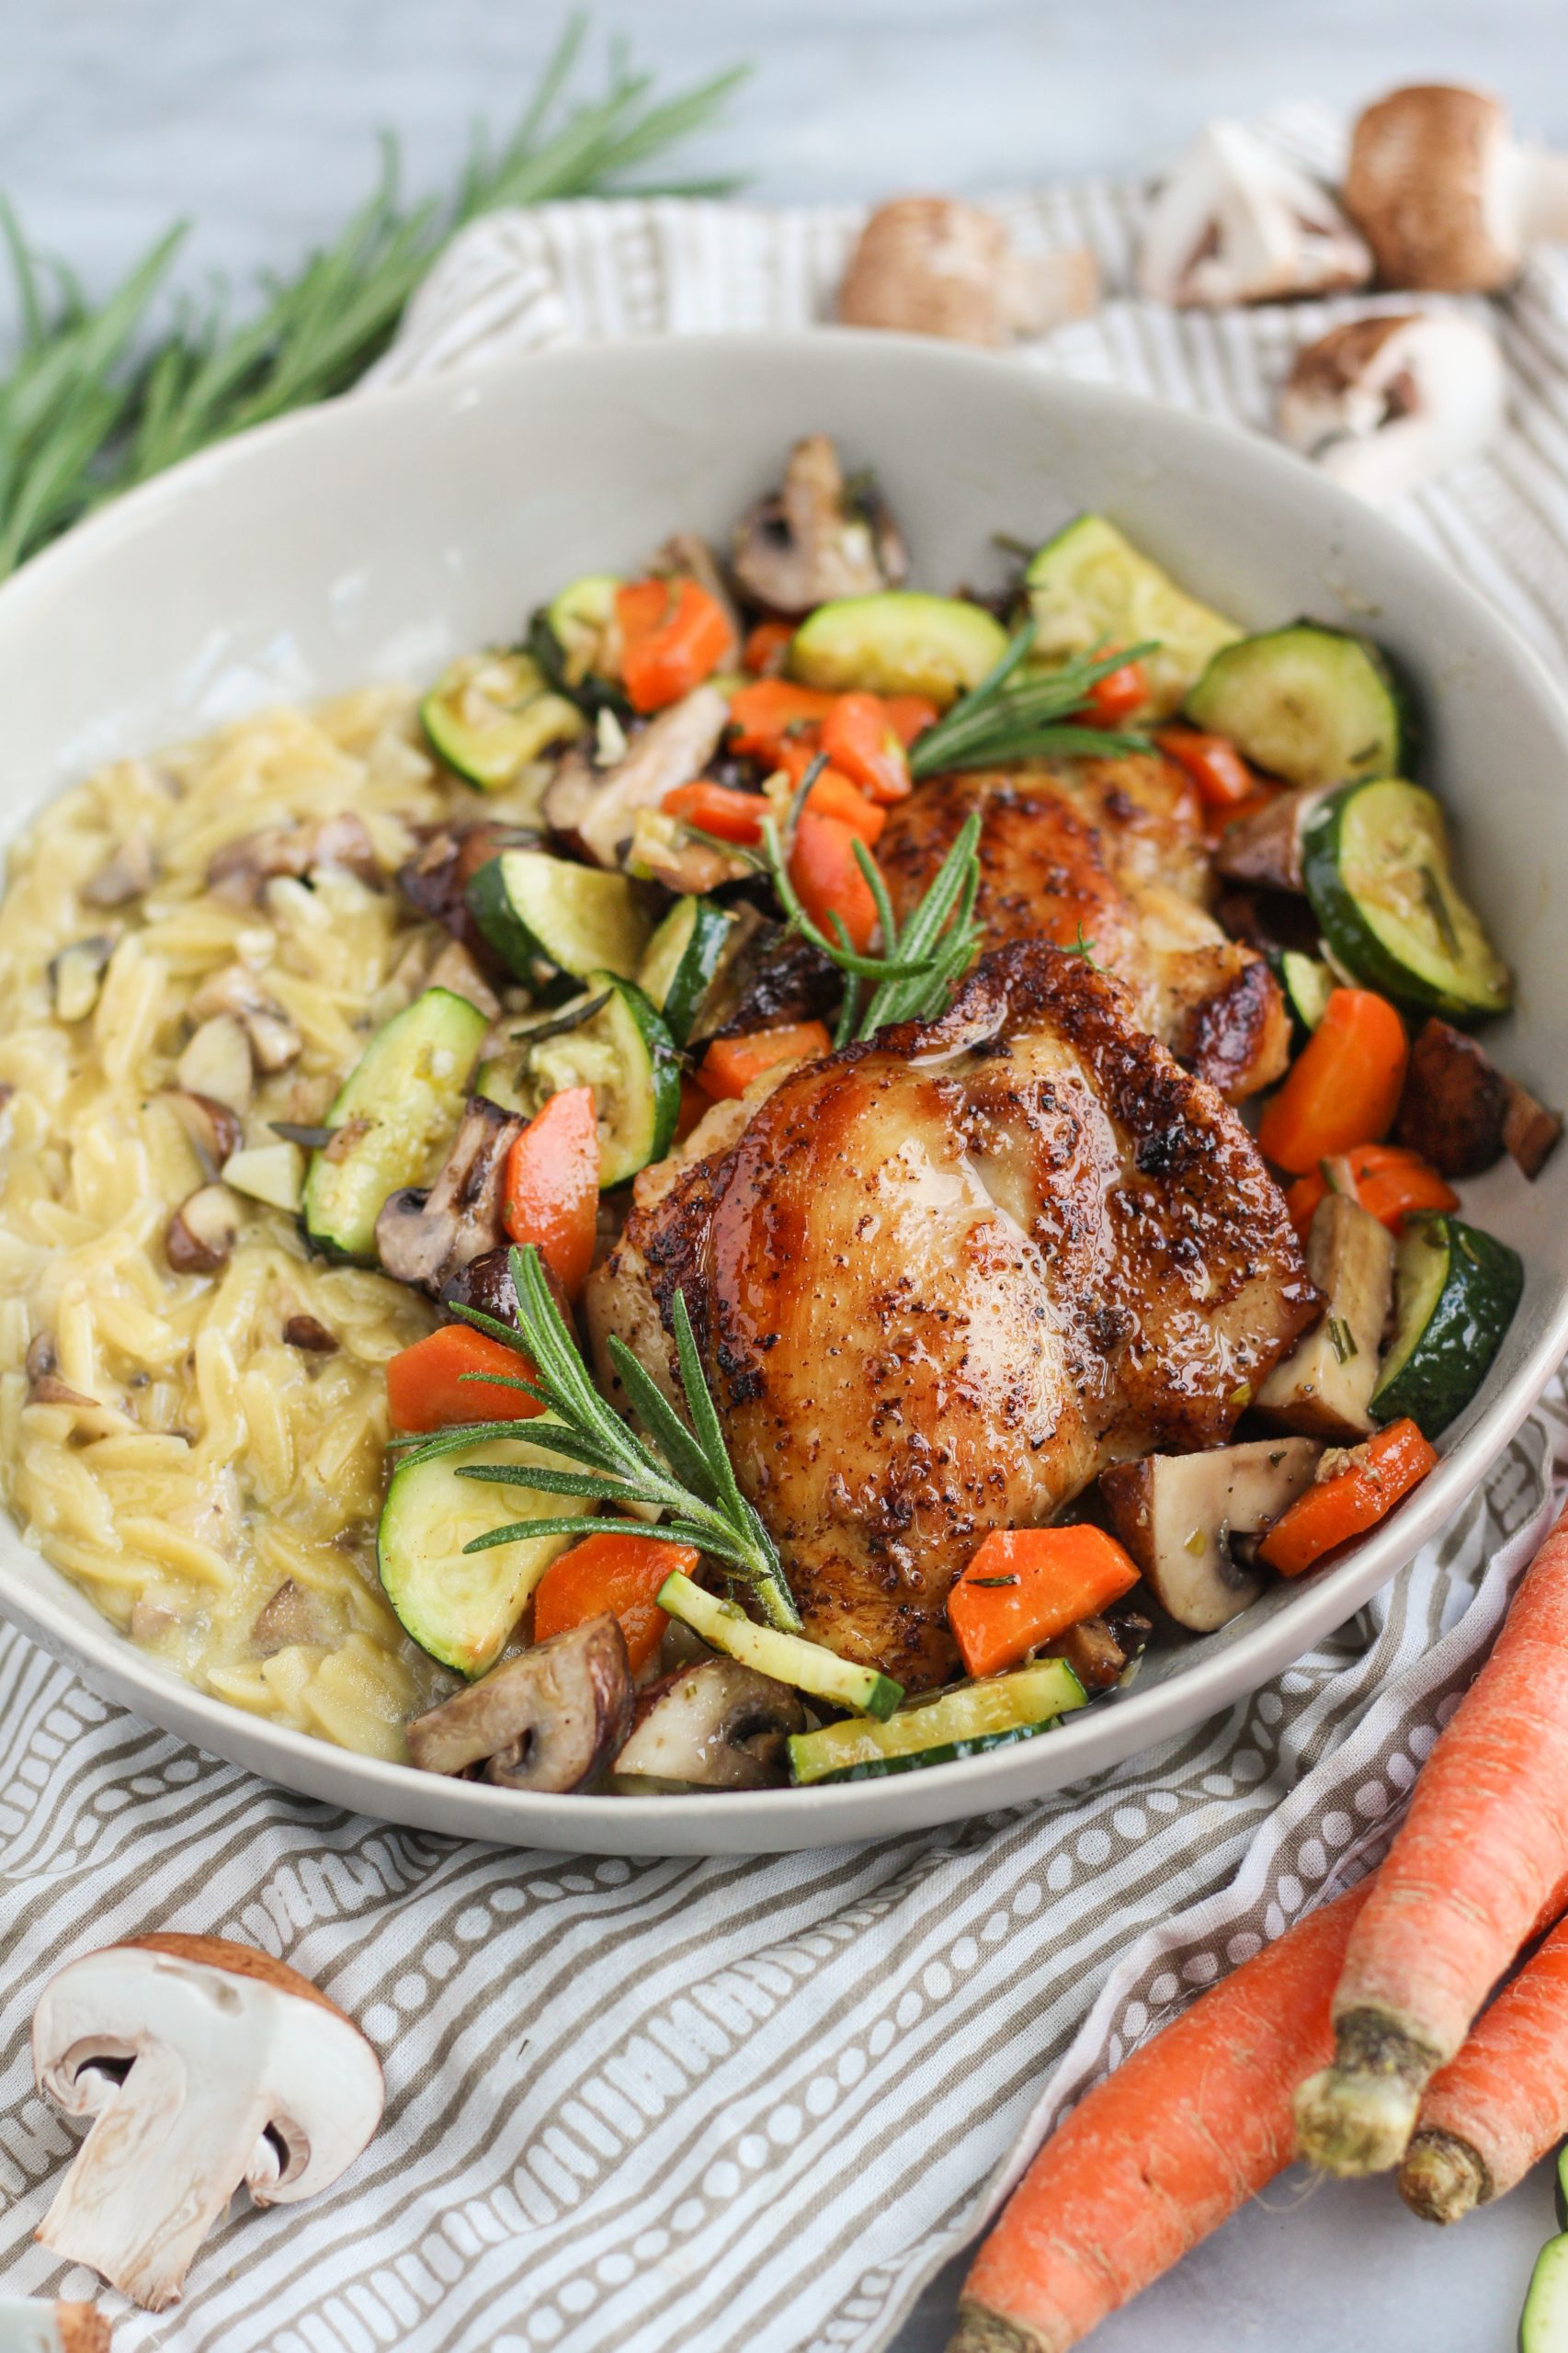 Garlic-Rosemary Roasted Chicken Thighs and Veggies with Mushroom Orzo Risotto